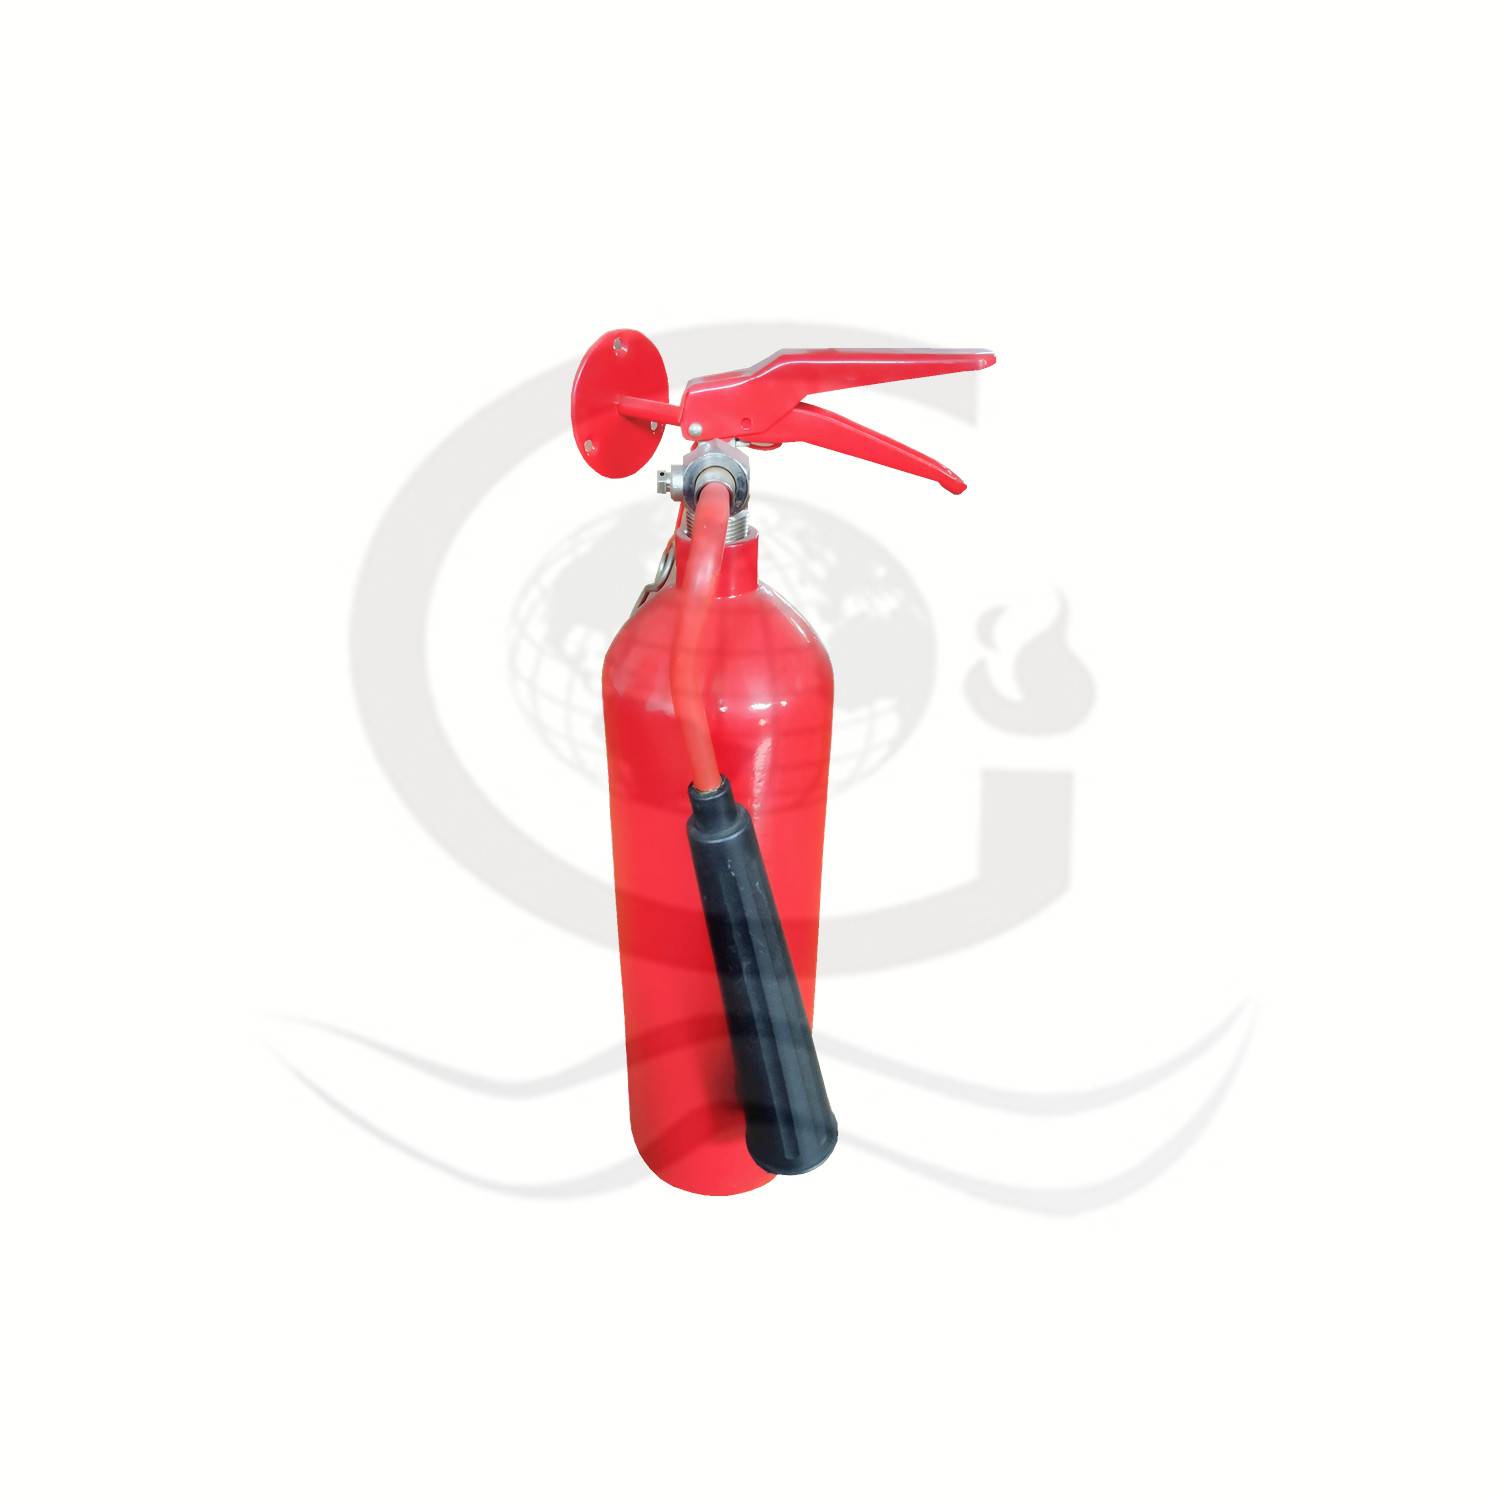 Co2 fire extinguisher Featured Image